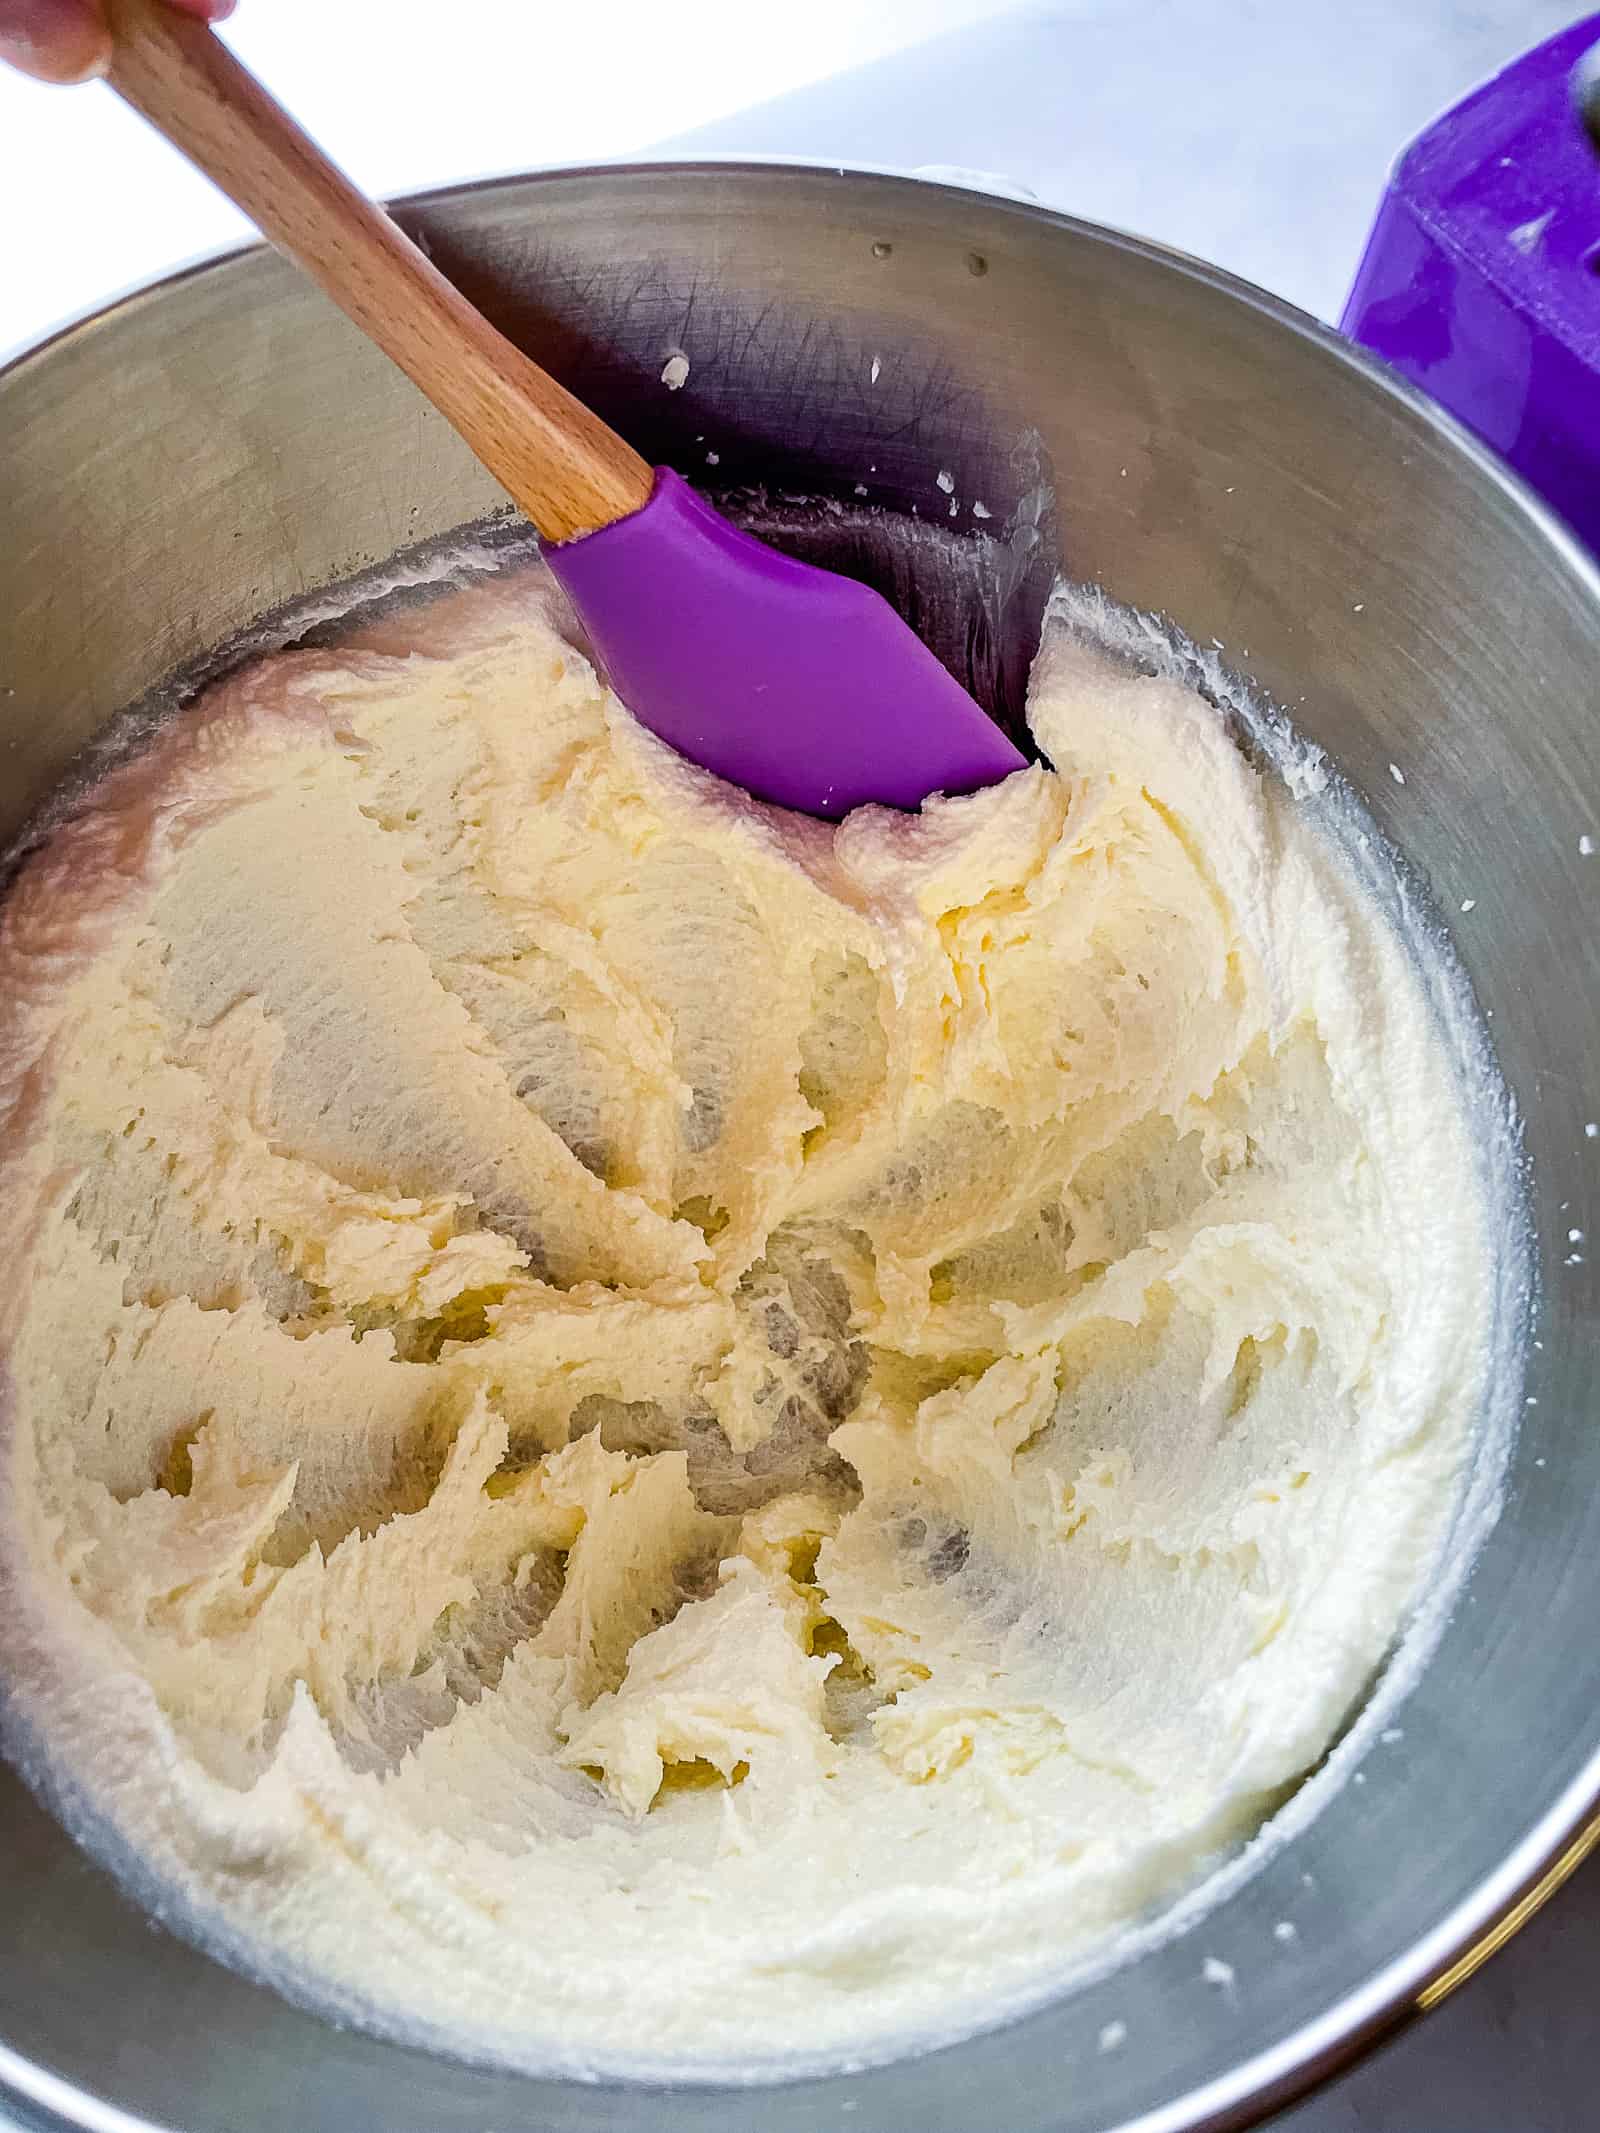 Scraping butter from the side of a mixing bowl.